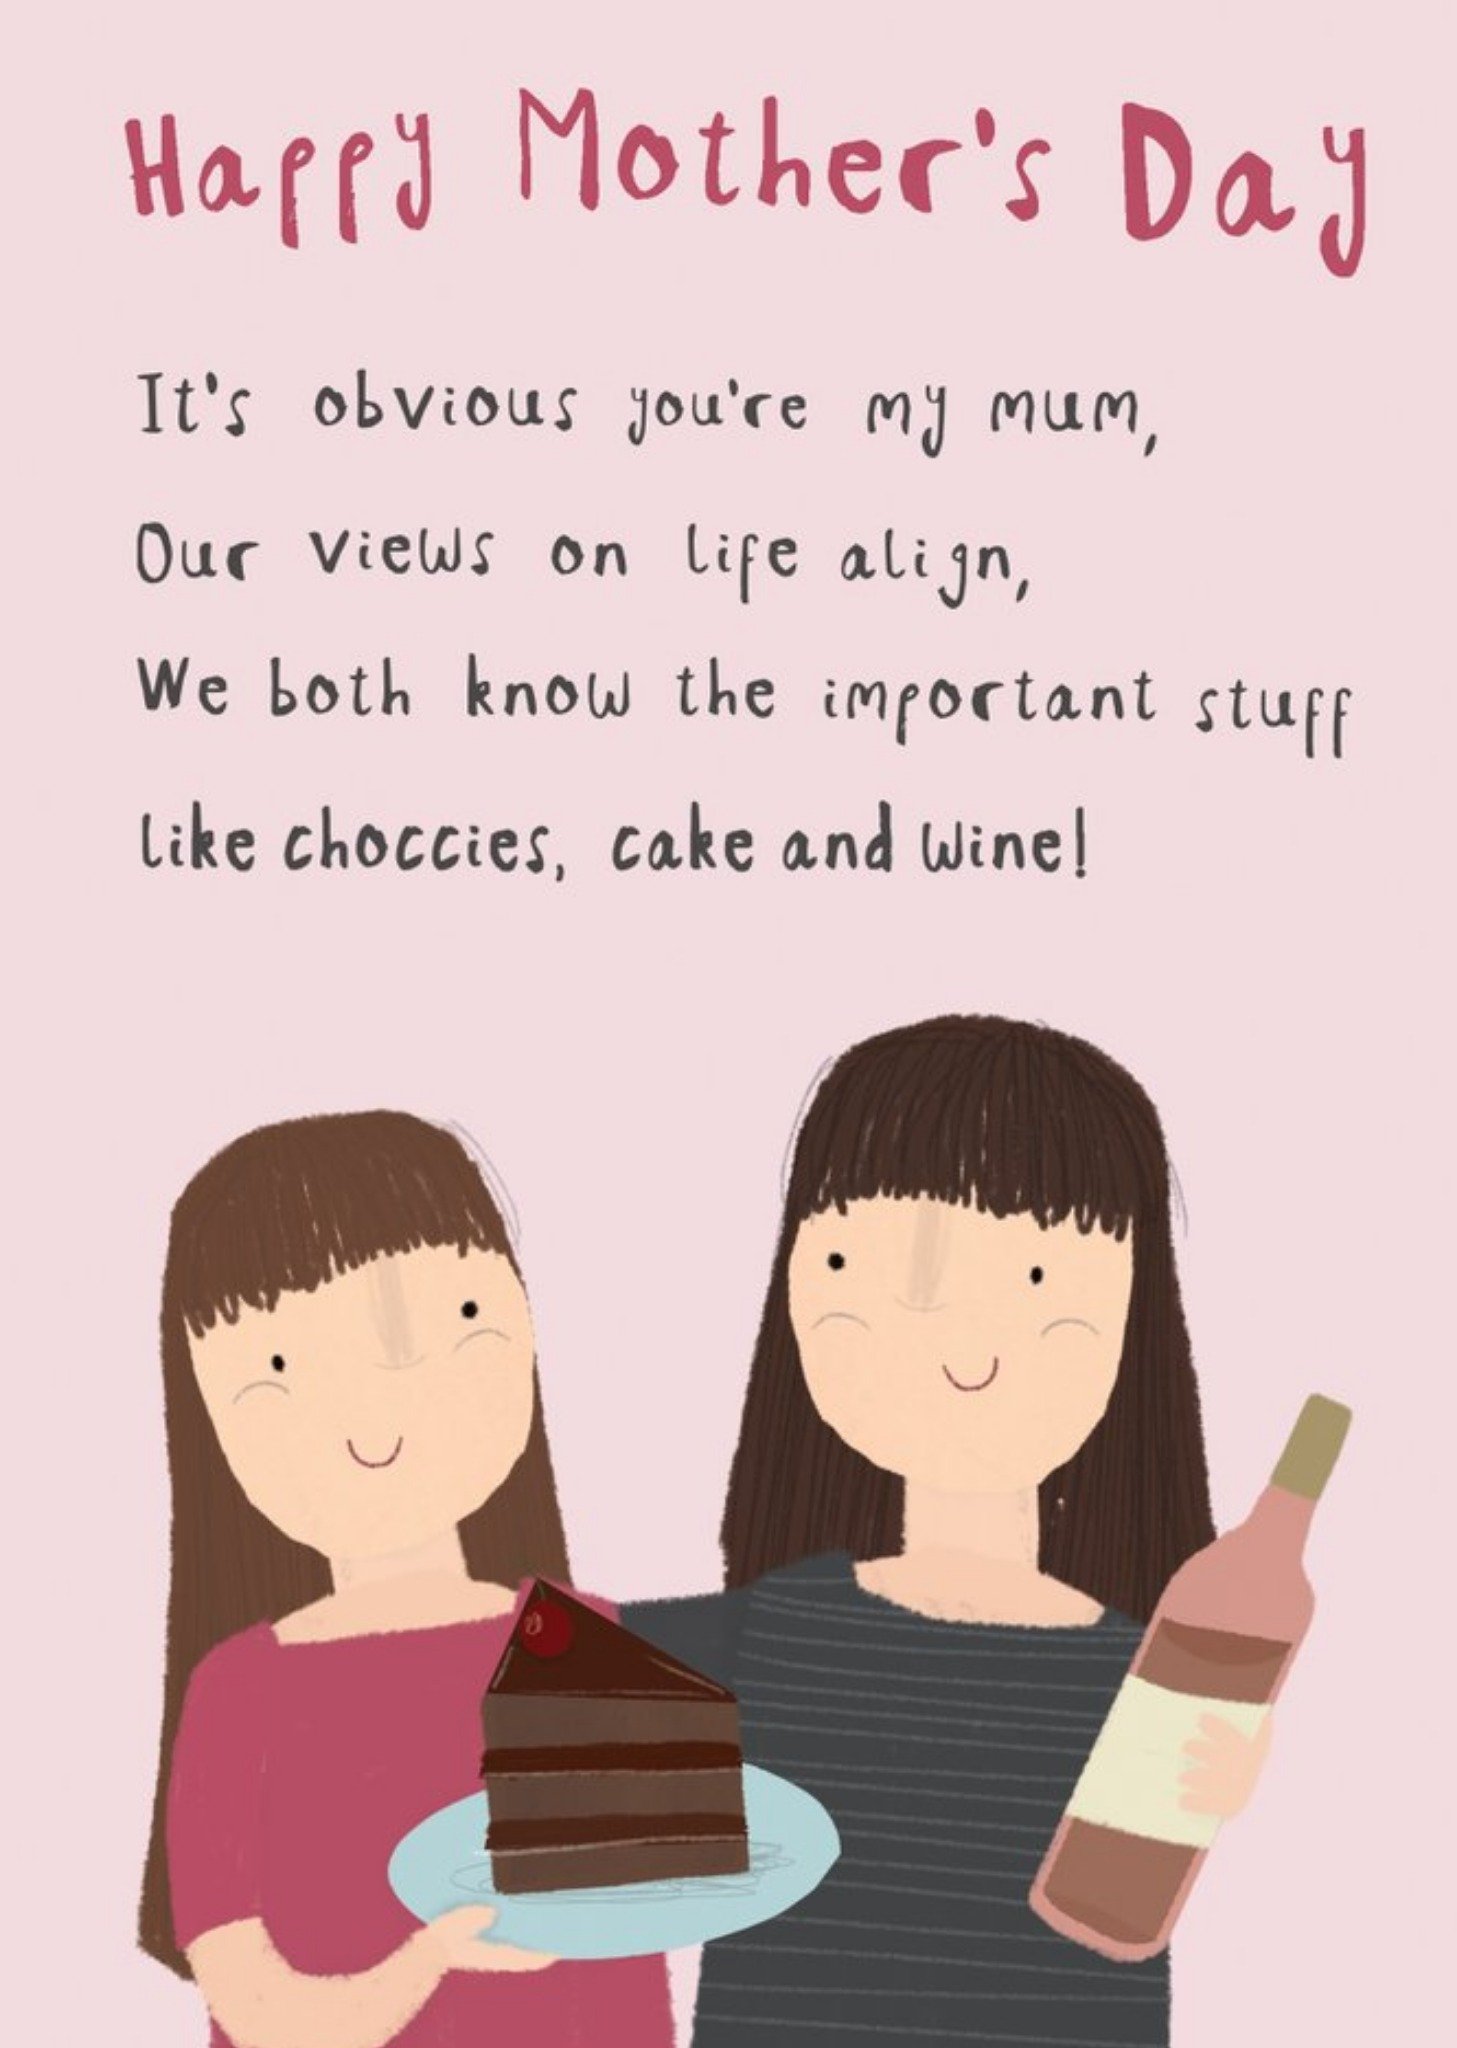 Moonpig Illustration Of A Mother And Daughter With Cake And Wine Sweet Mother's Day Card Ecard